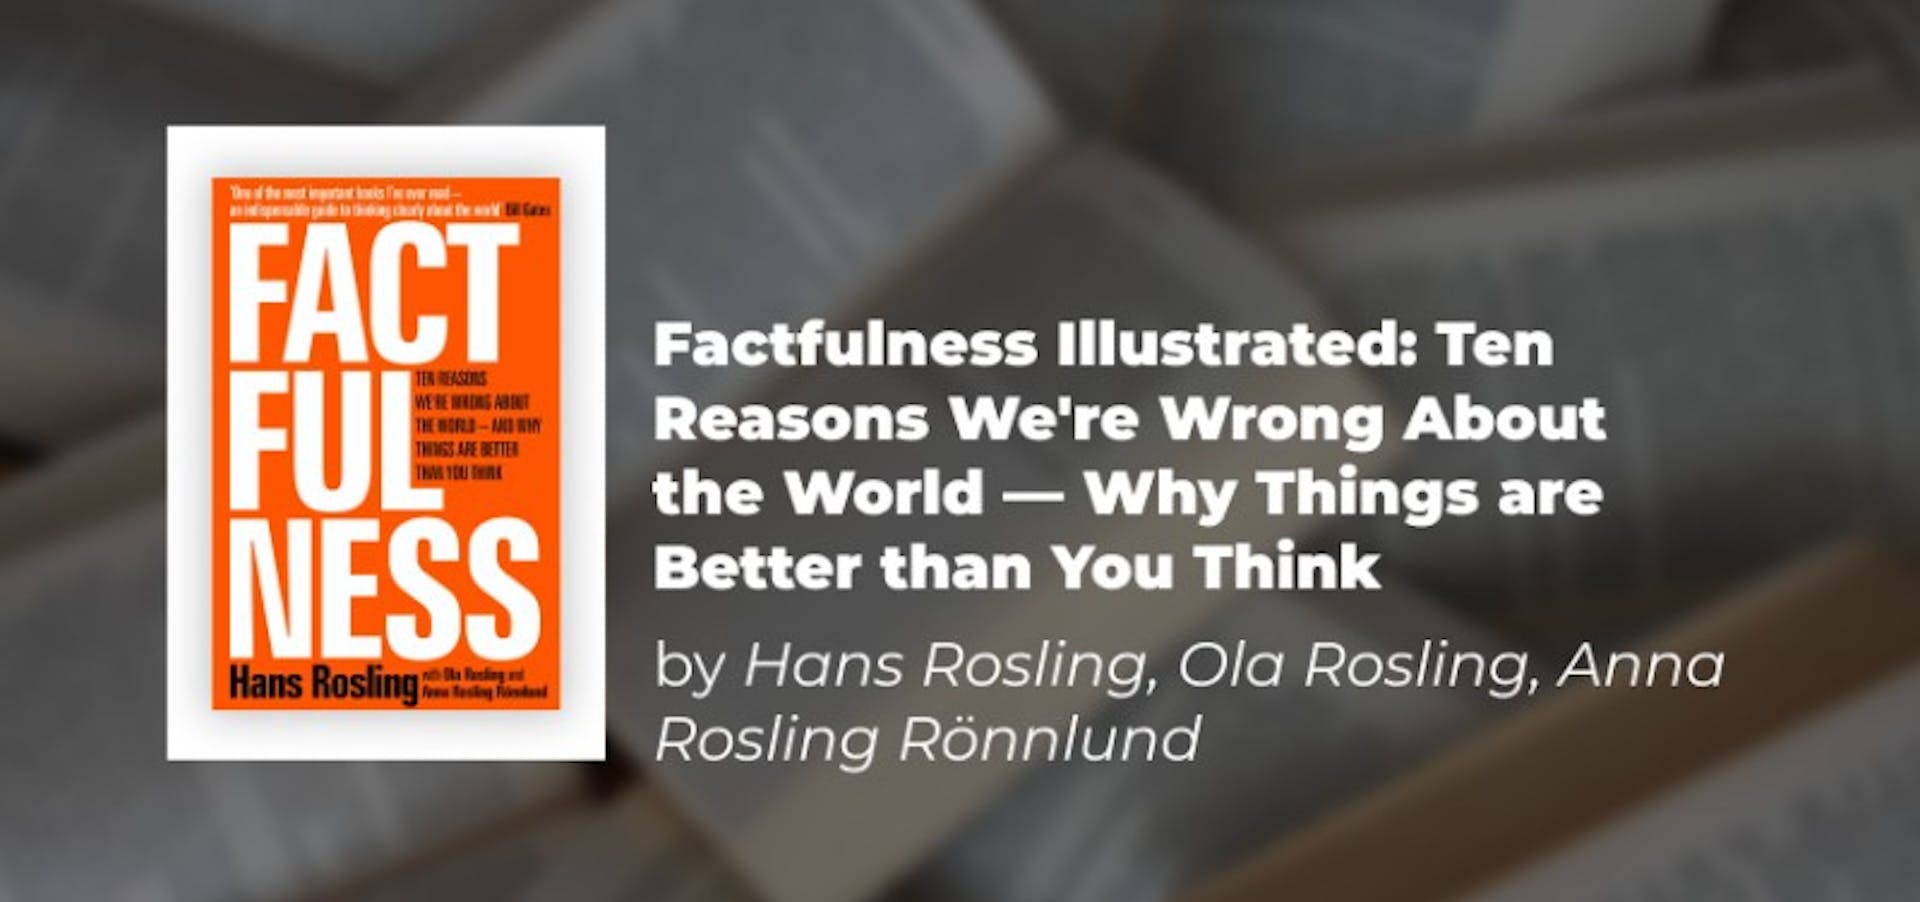 Factfulness Illustrated: Ten Reasons We're Wrong About the World — Why Things Are Better than You Think